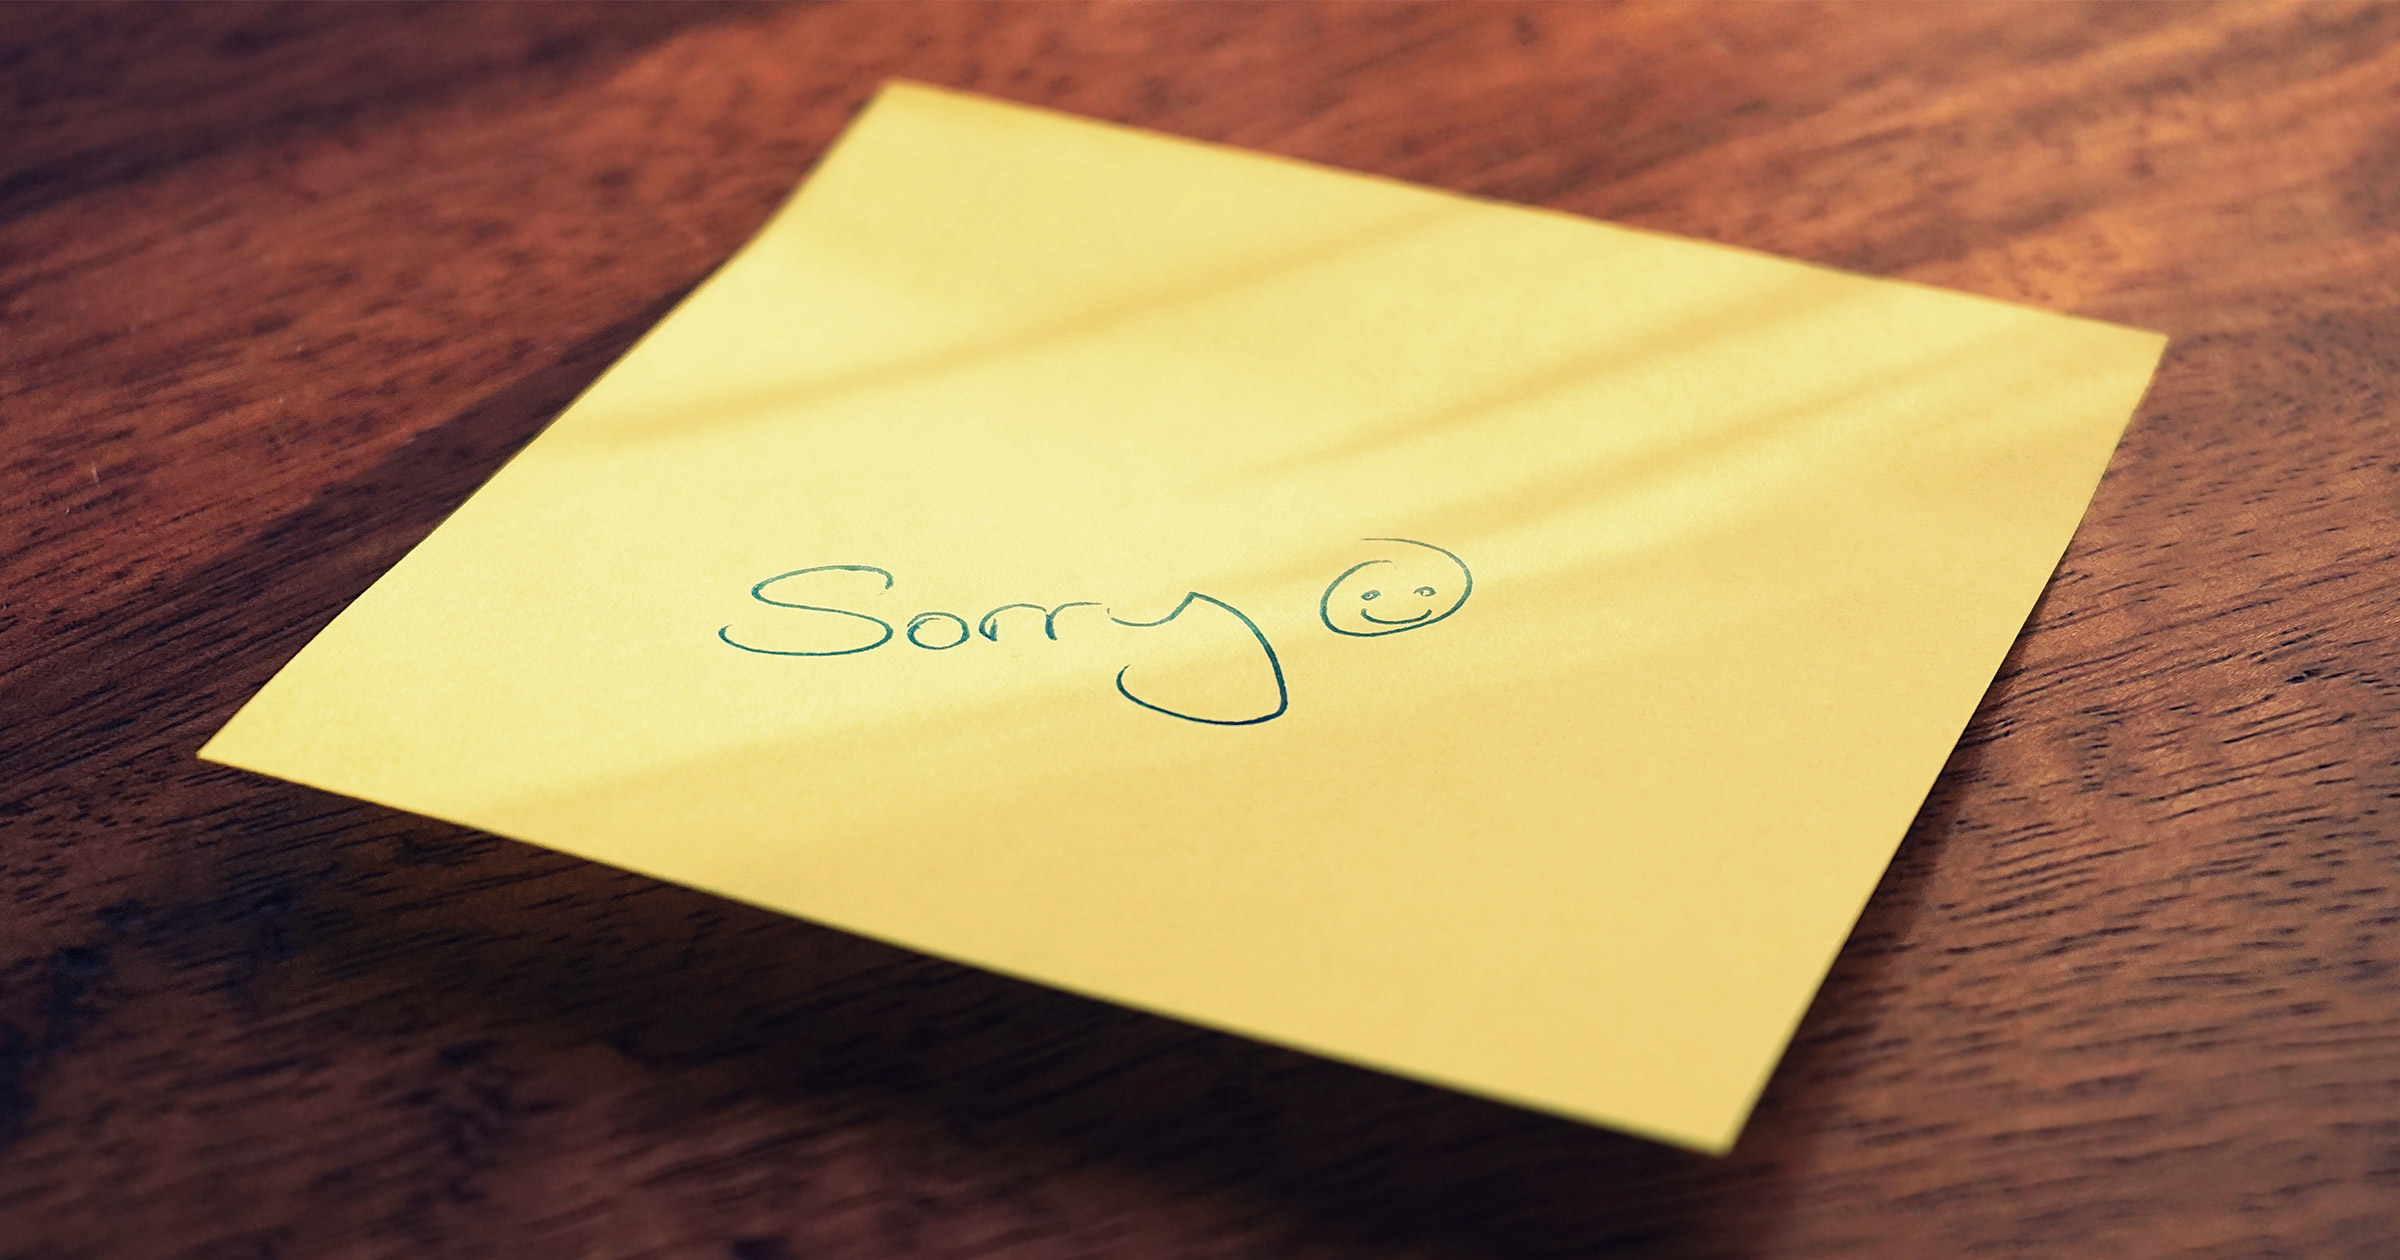 Apology Note